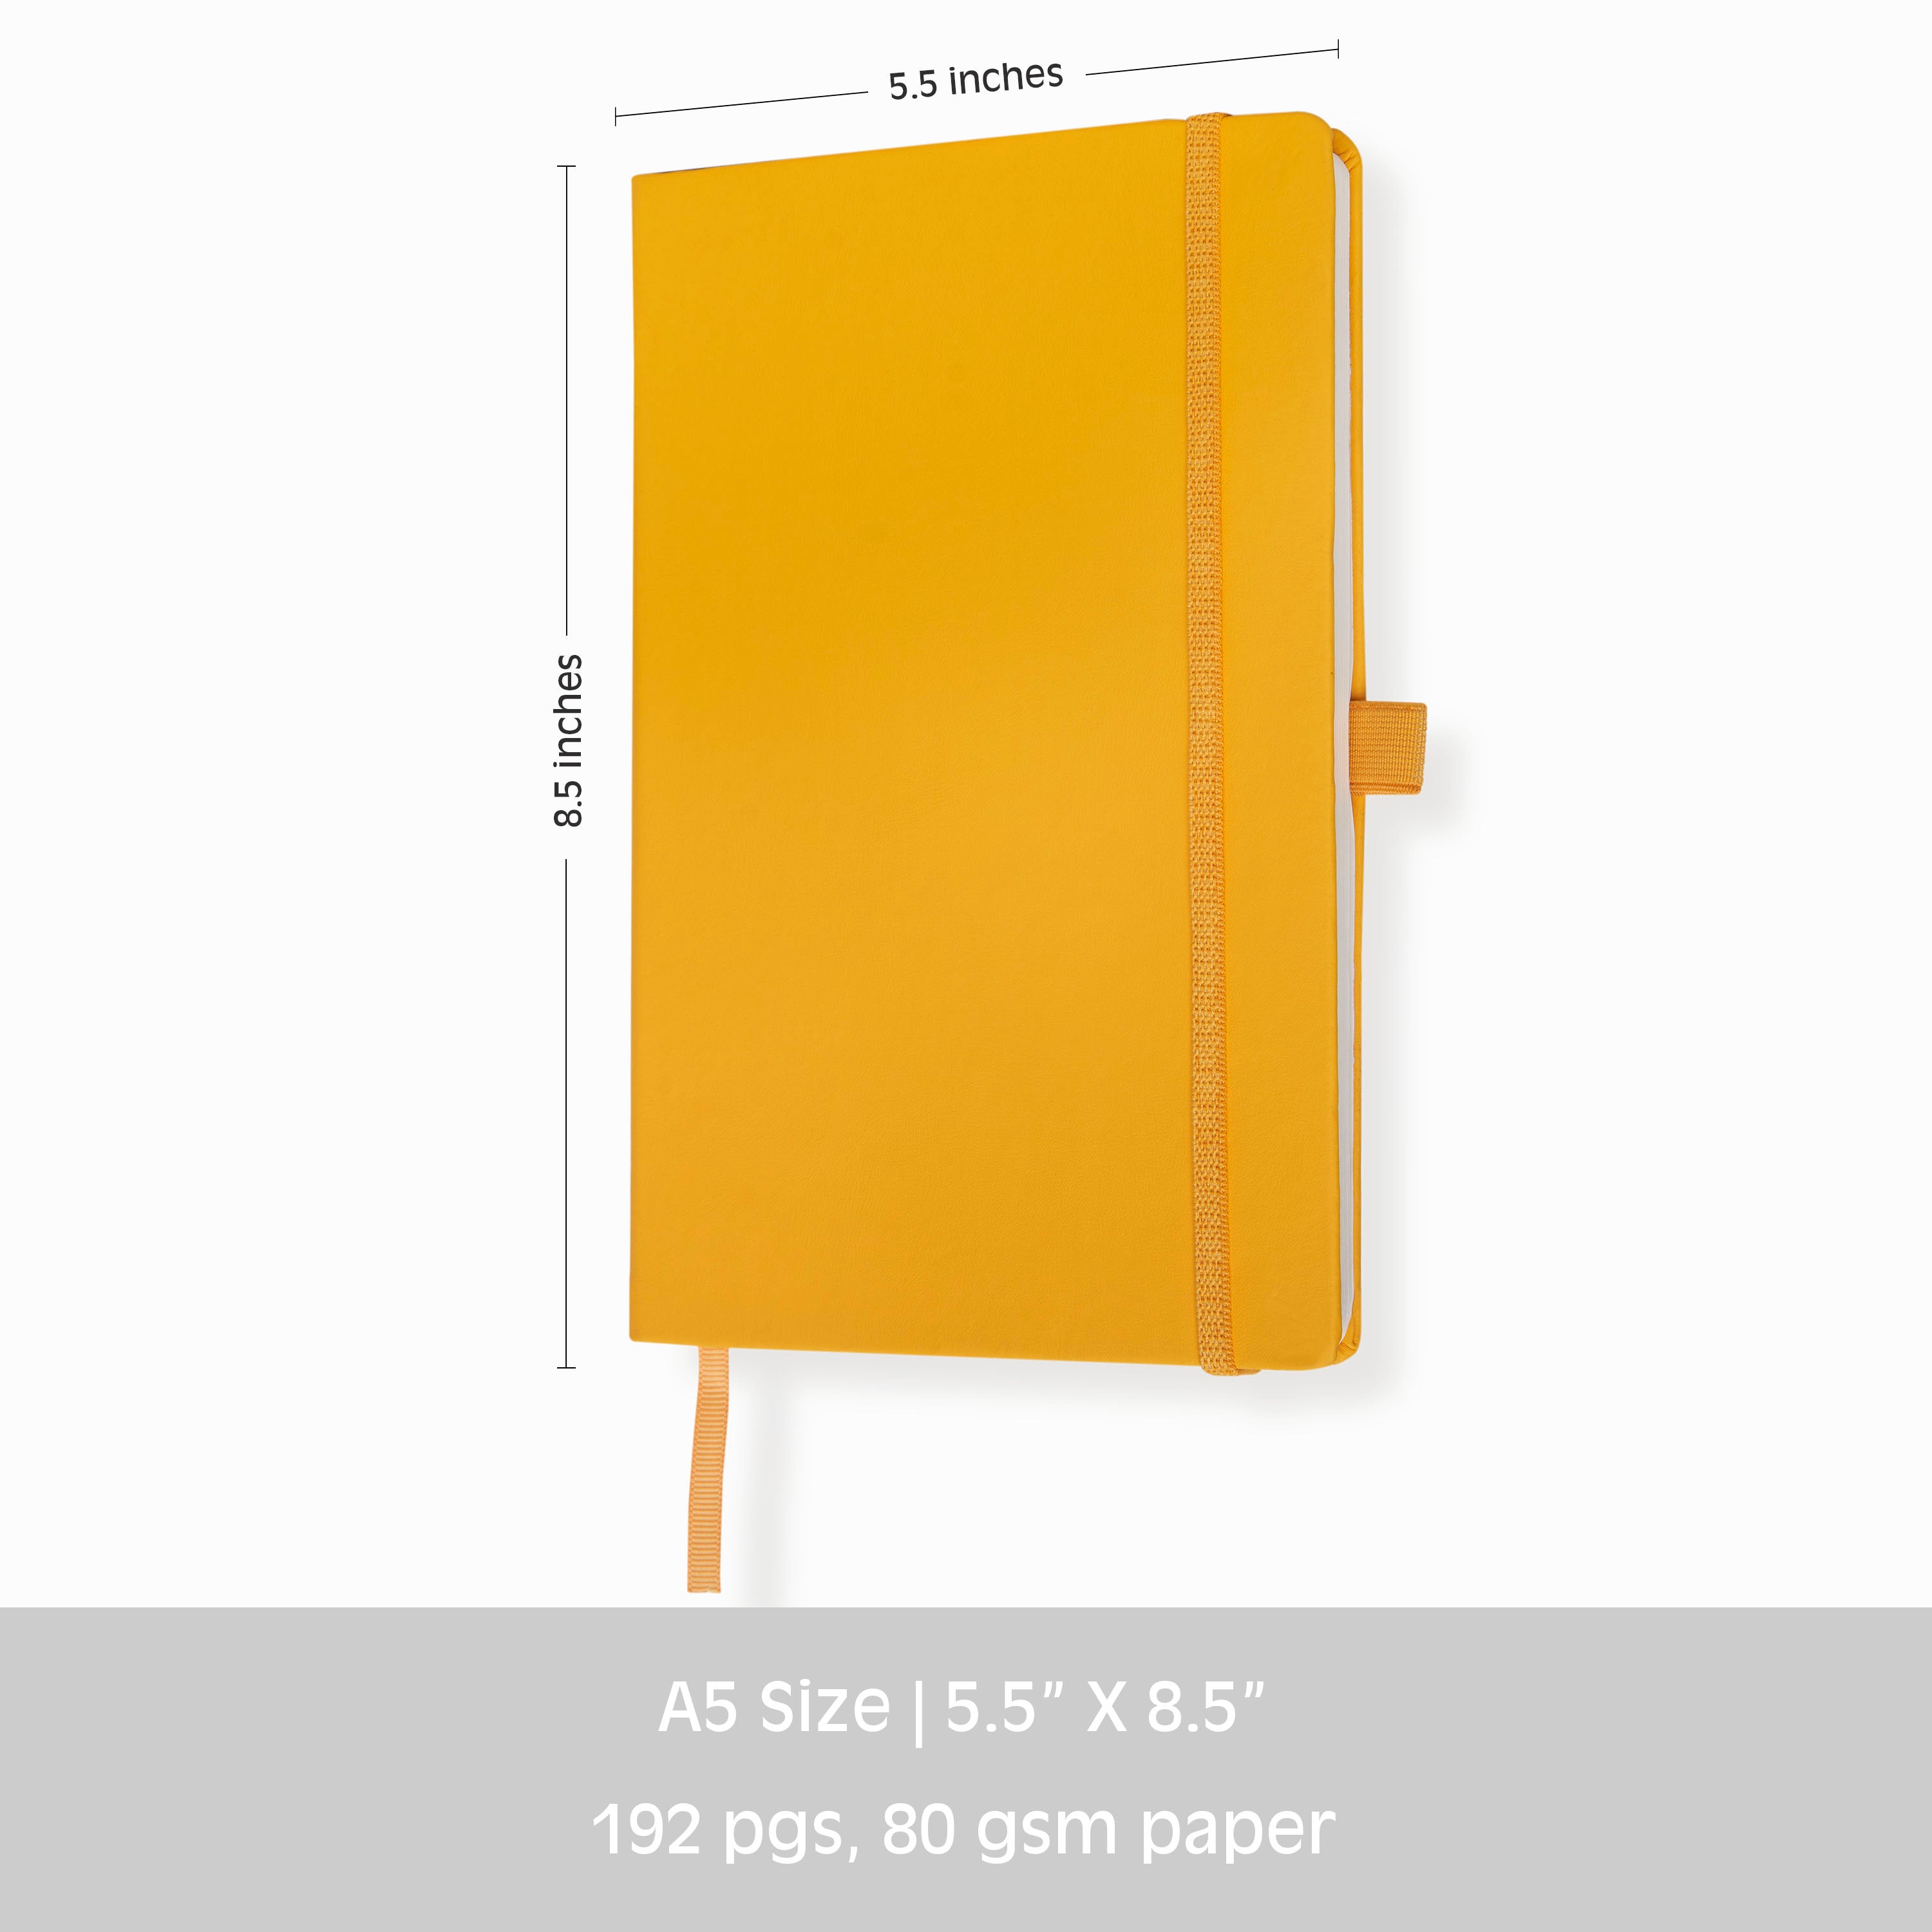 Pro Series Executive A5 PU Leather Hardbound Unruled Diary with Pen Loop - YELLOW